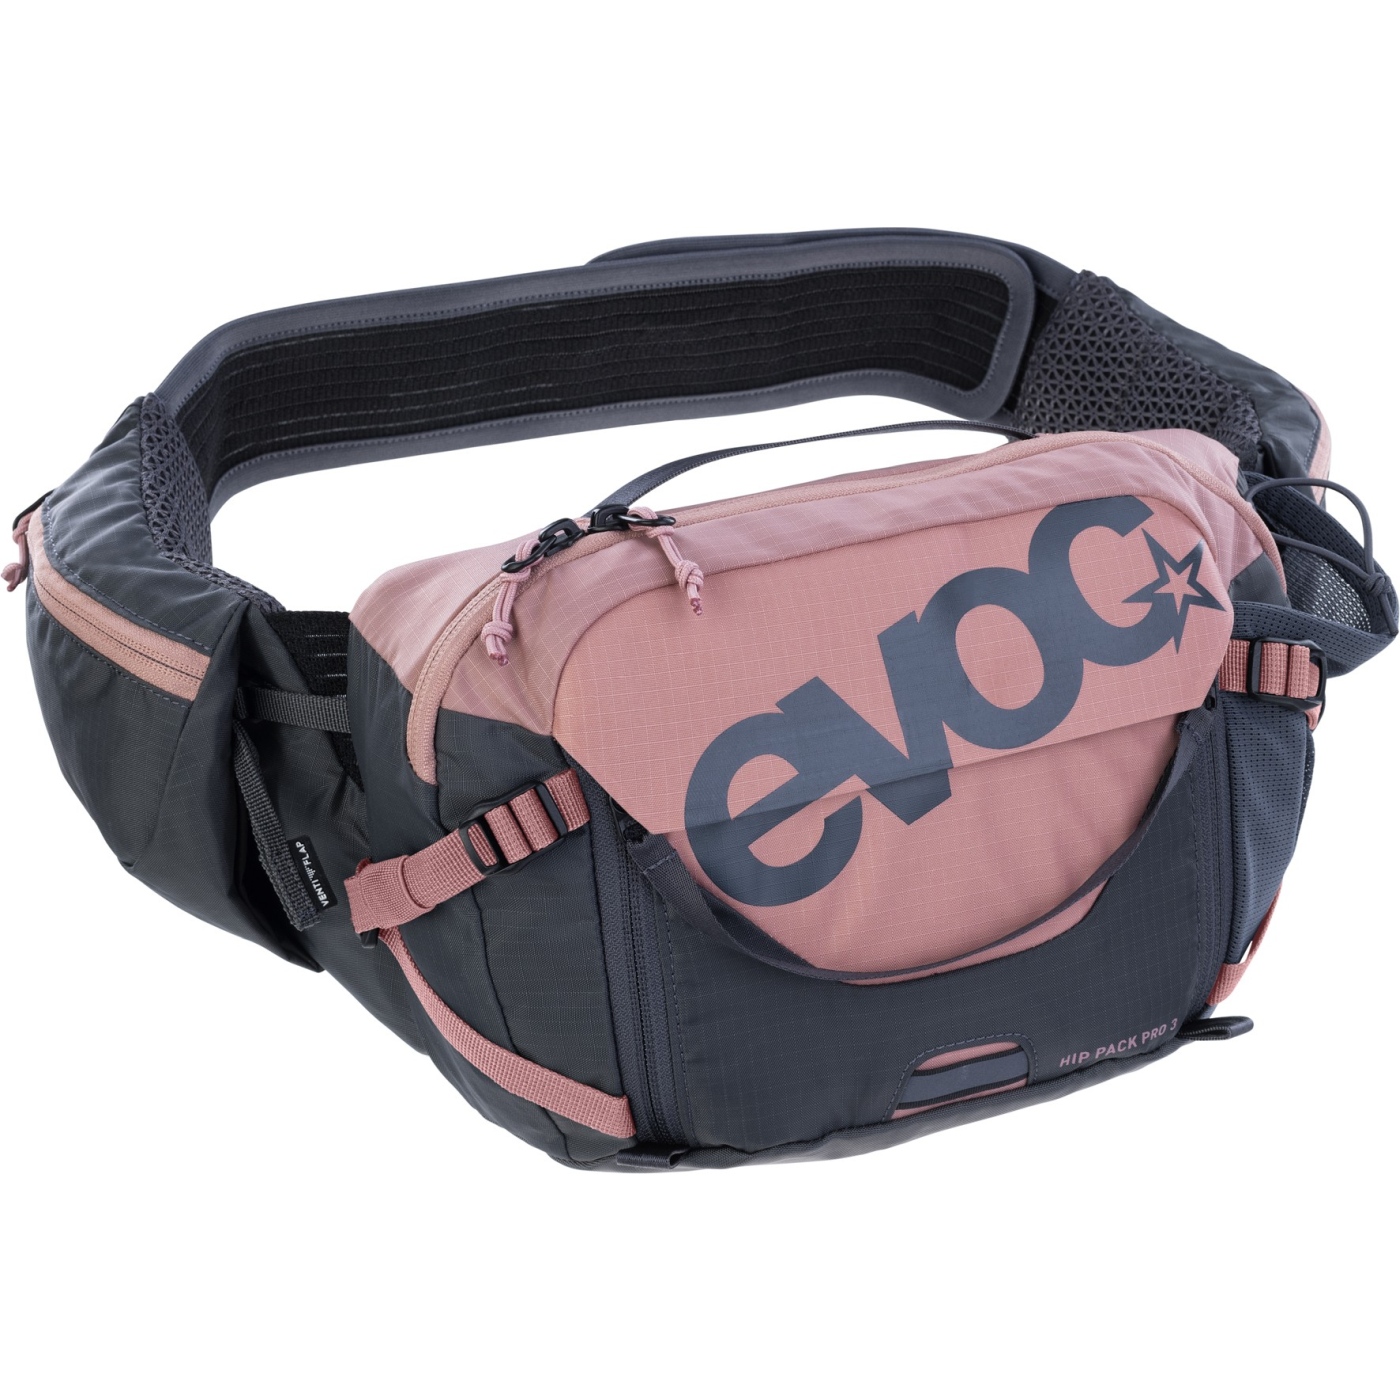 Picture of EVOC Hip Pack Pro - 3 L - Dusty Pink - Carbon Grey